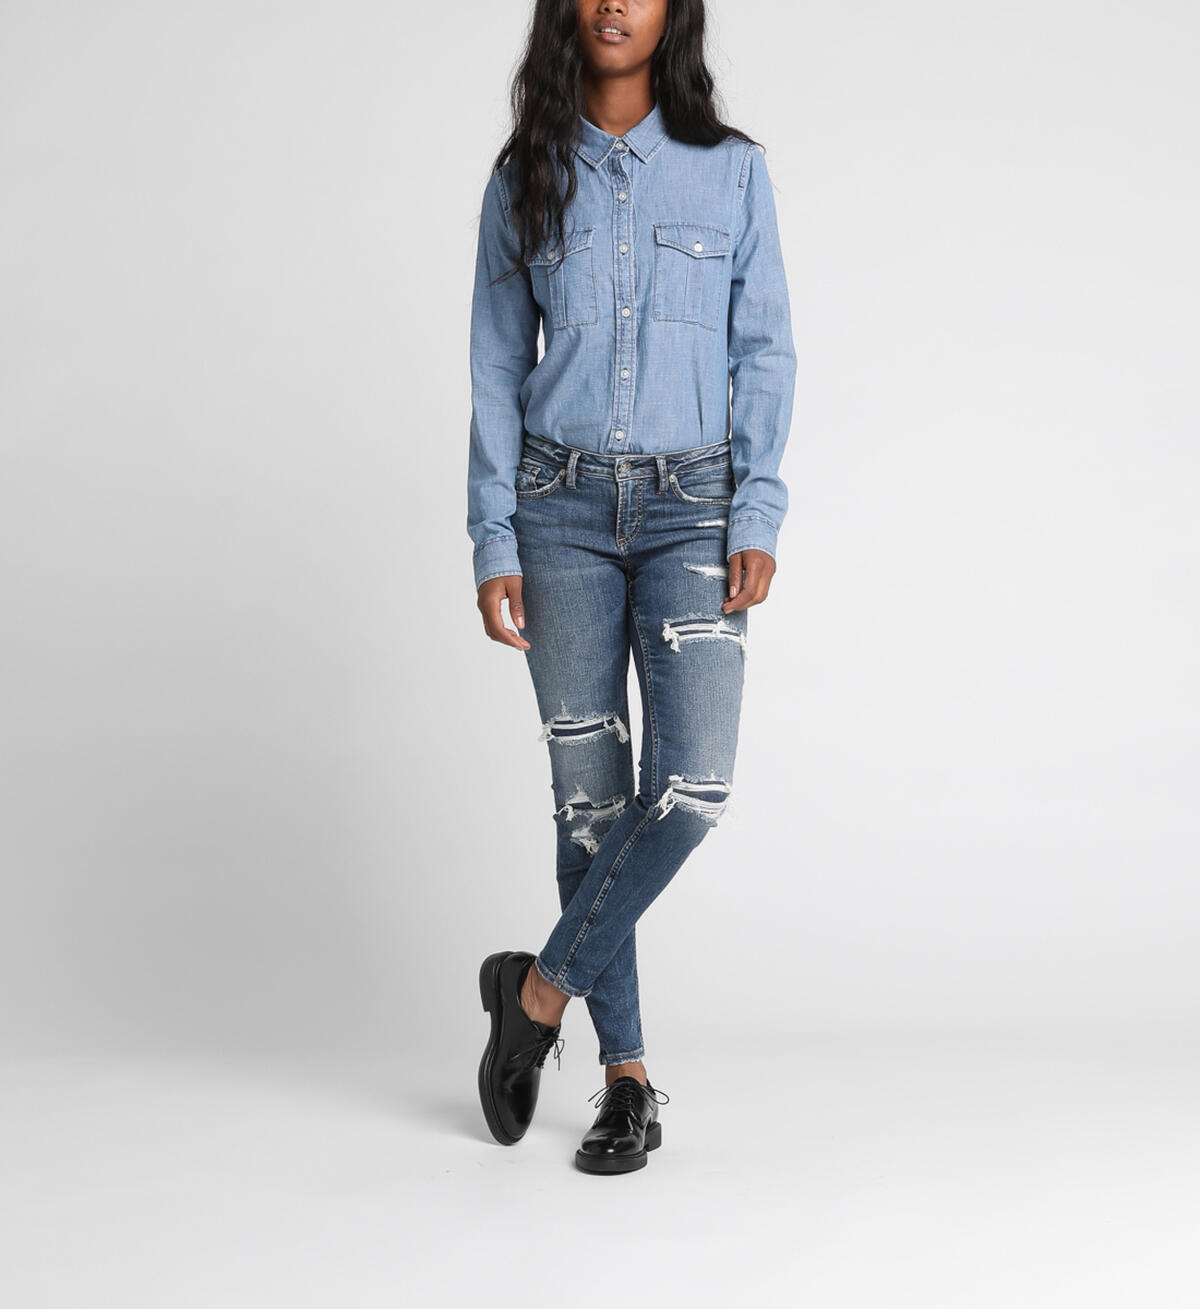 Aiko Mid-Rise Skinny Patched Jeans, , hi-res image number 0